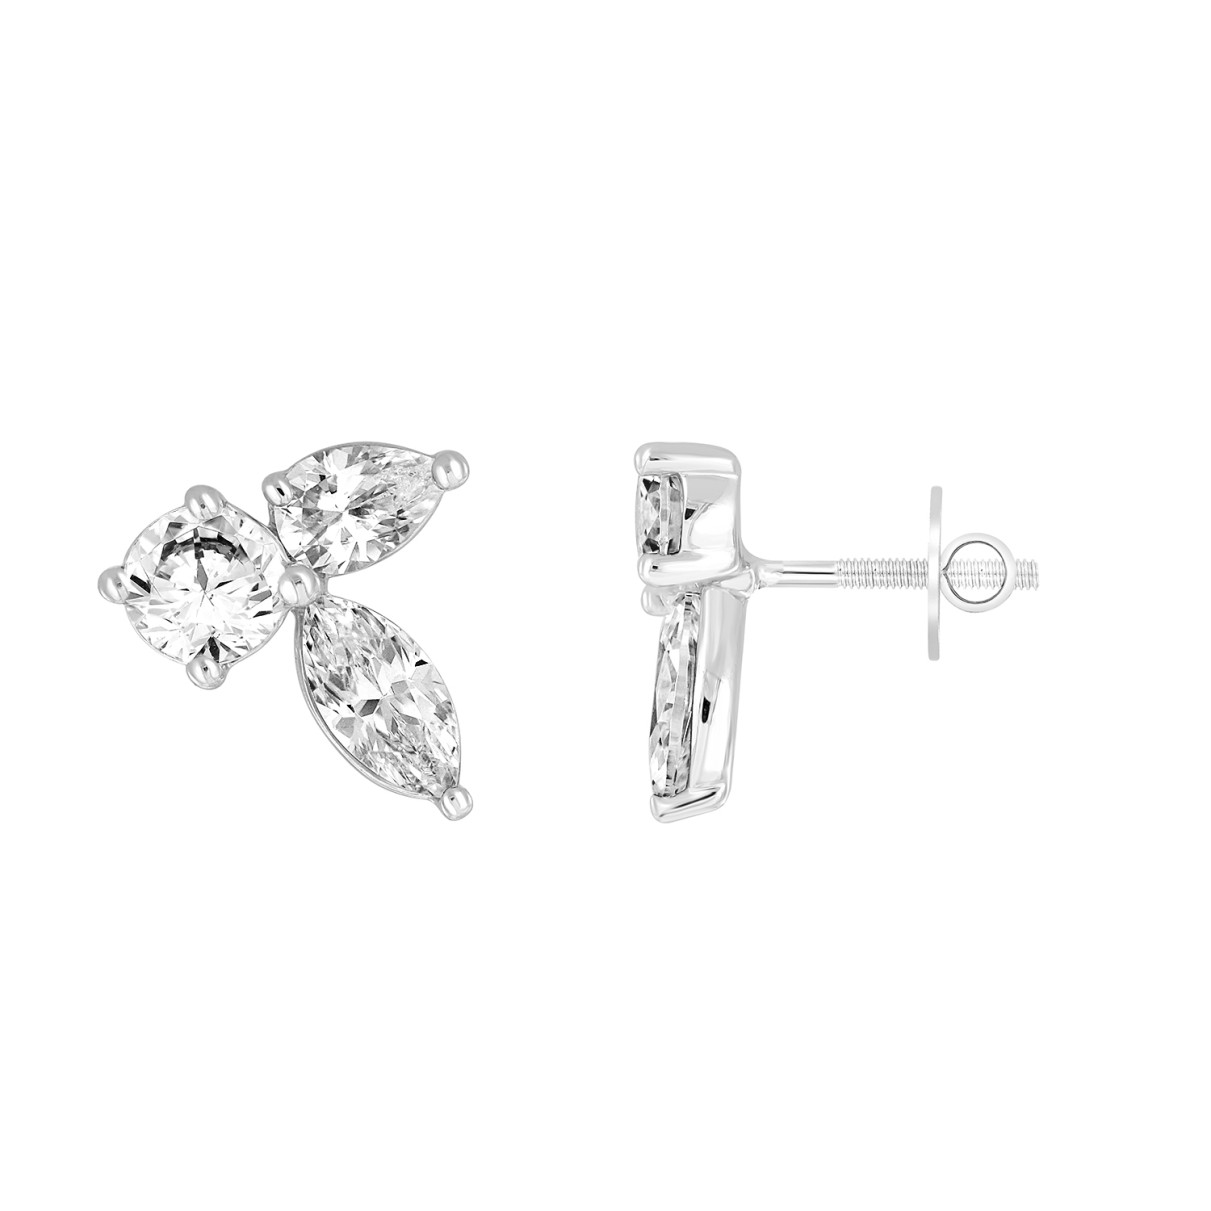 LADIES STUD EARRINGS  3CT PEAR/ROUND/MARQUISE DIAMOND 14K WHITE GOLD